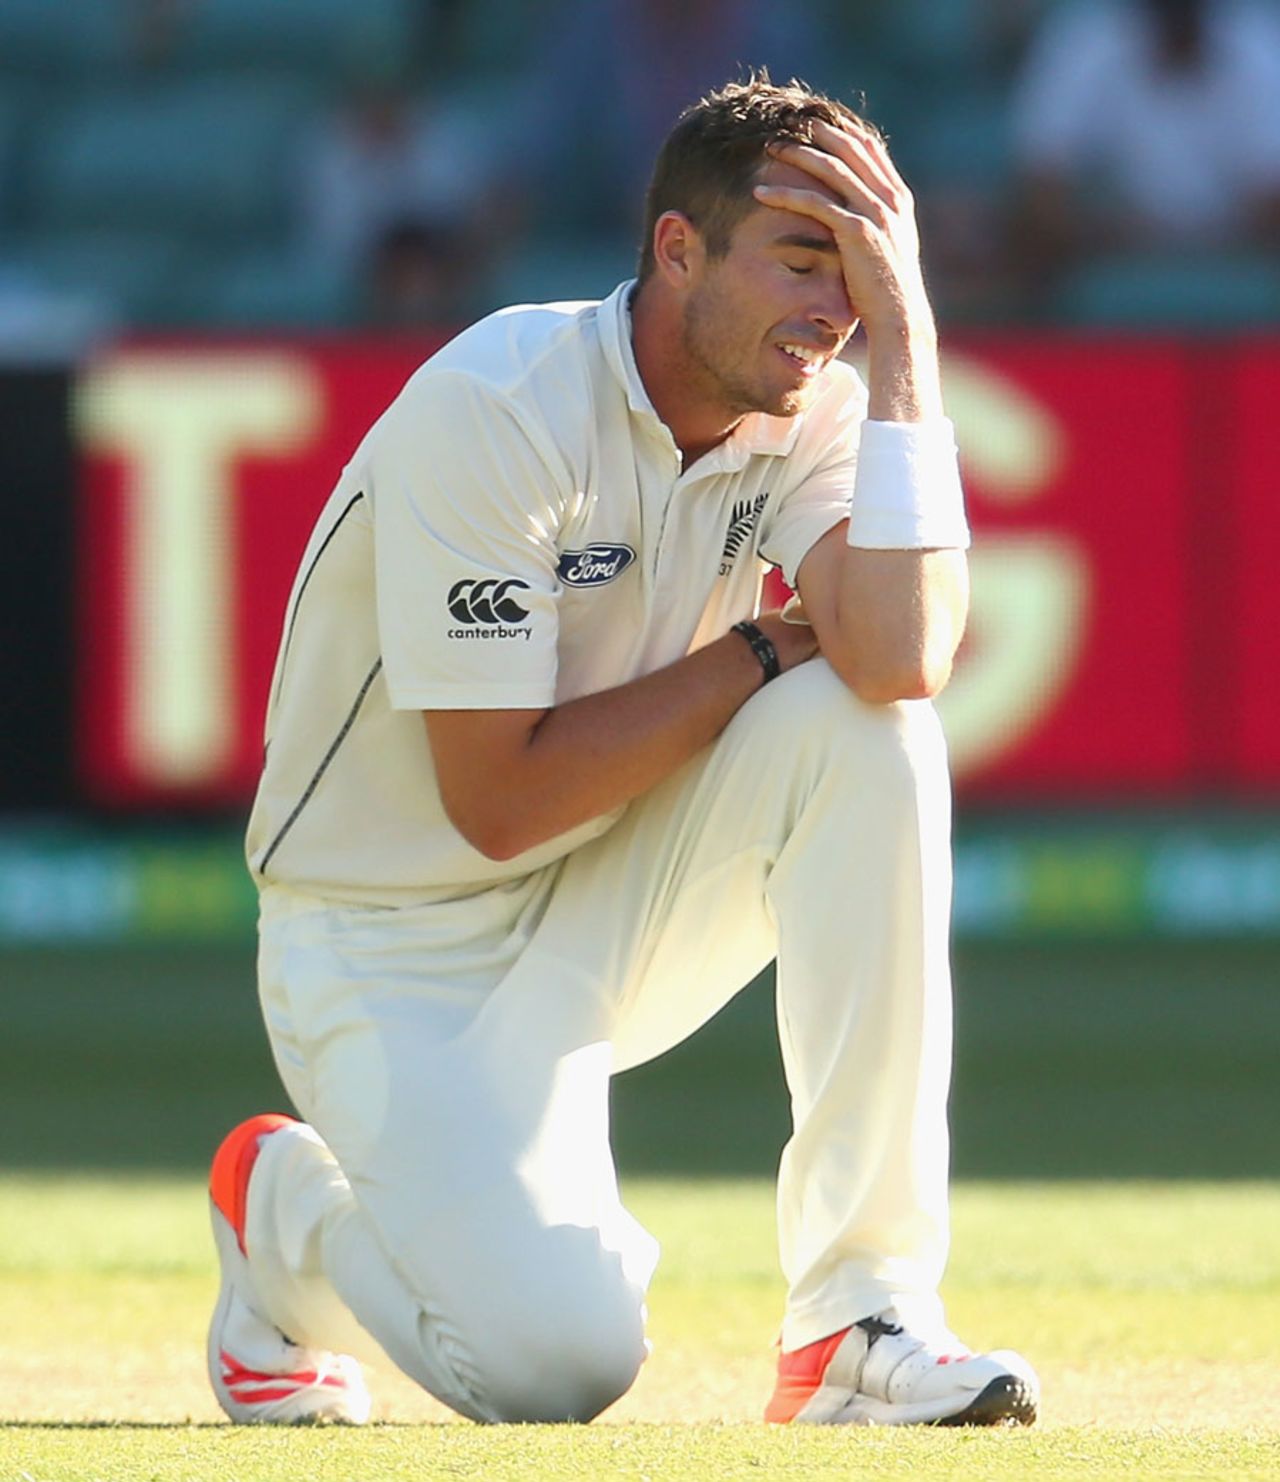 Tim Southee wears a dejected look after an appeal was turned down, Australia v New Zealand, 3rd Test, Adelaide, 3rd day, November 29, 2015